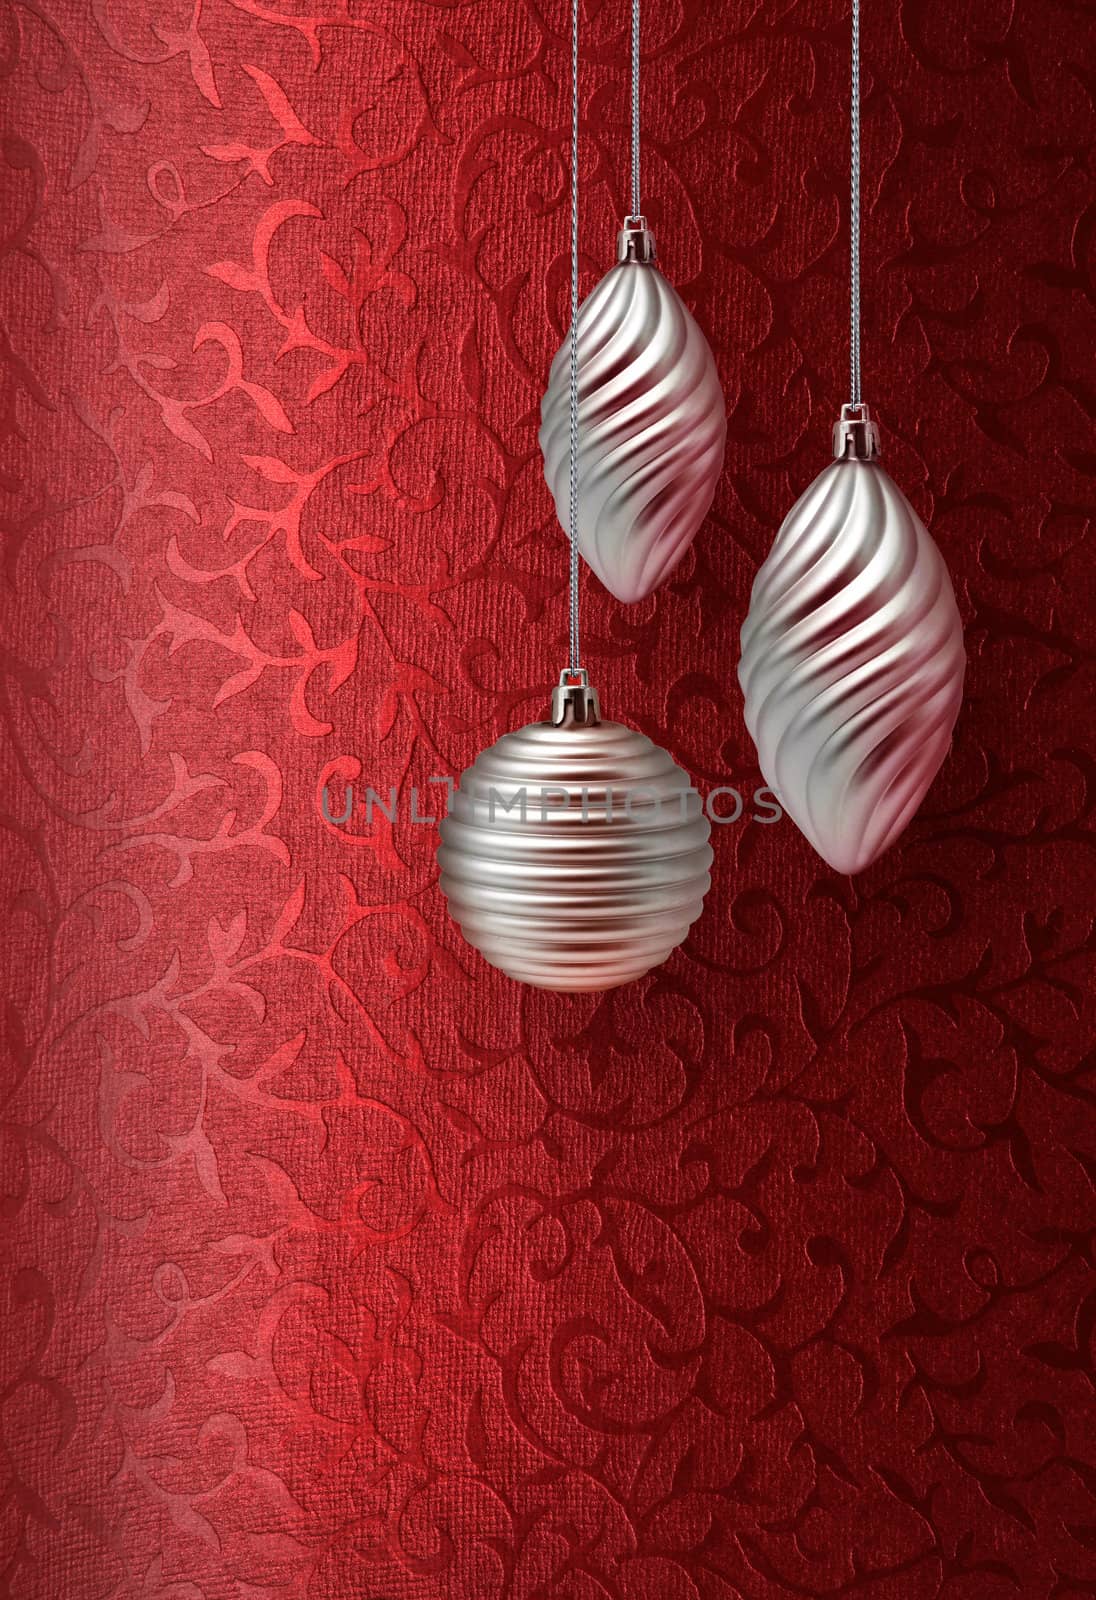 Silver Christmas decoration on vivid red brocade fabric pattern background